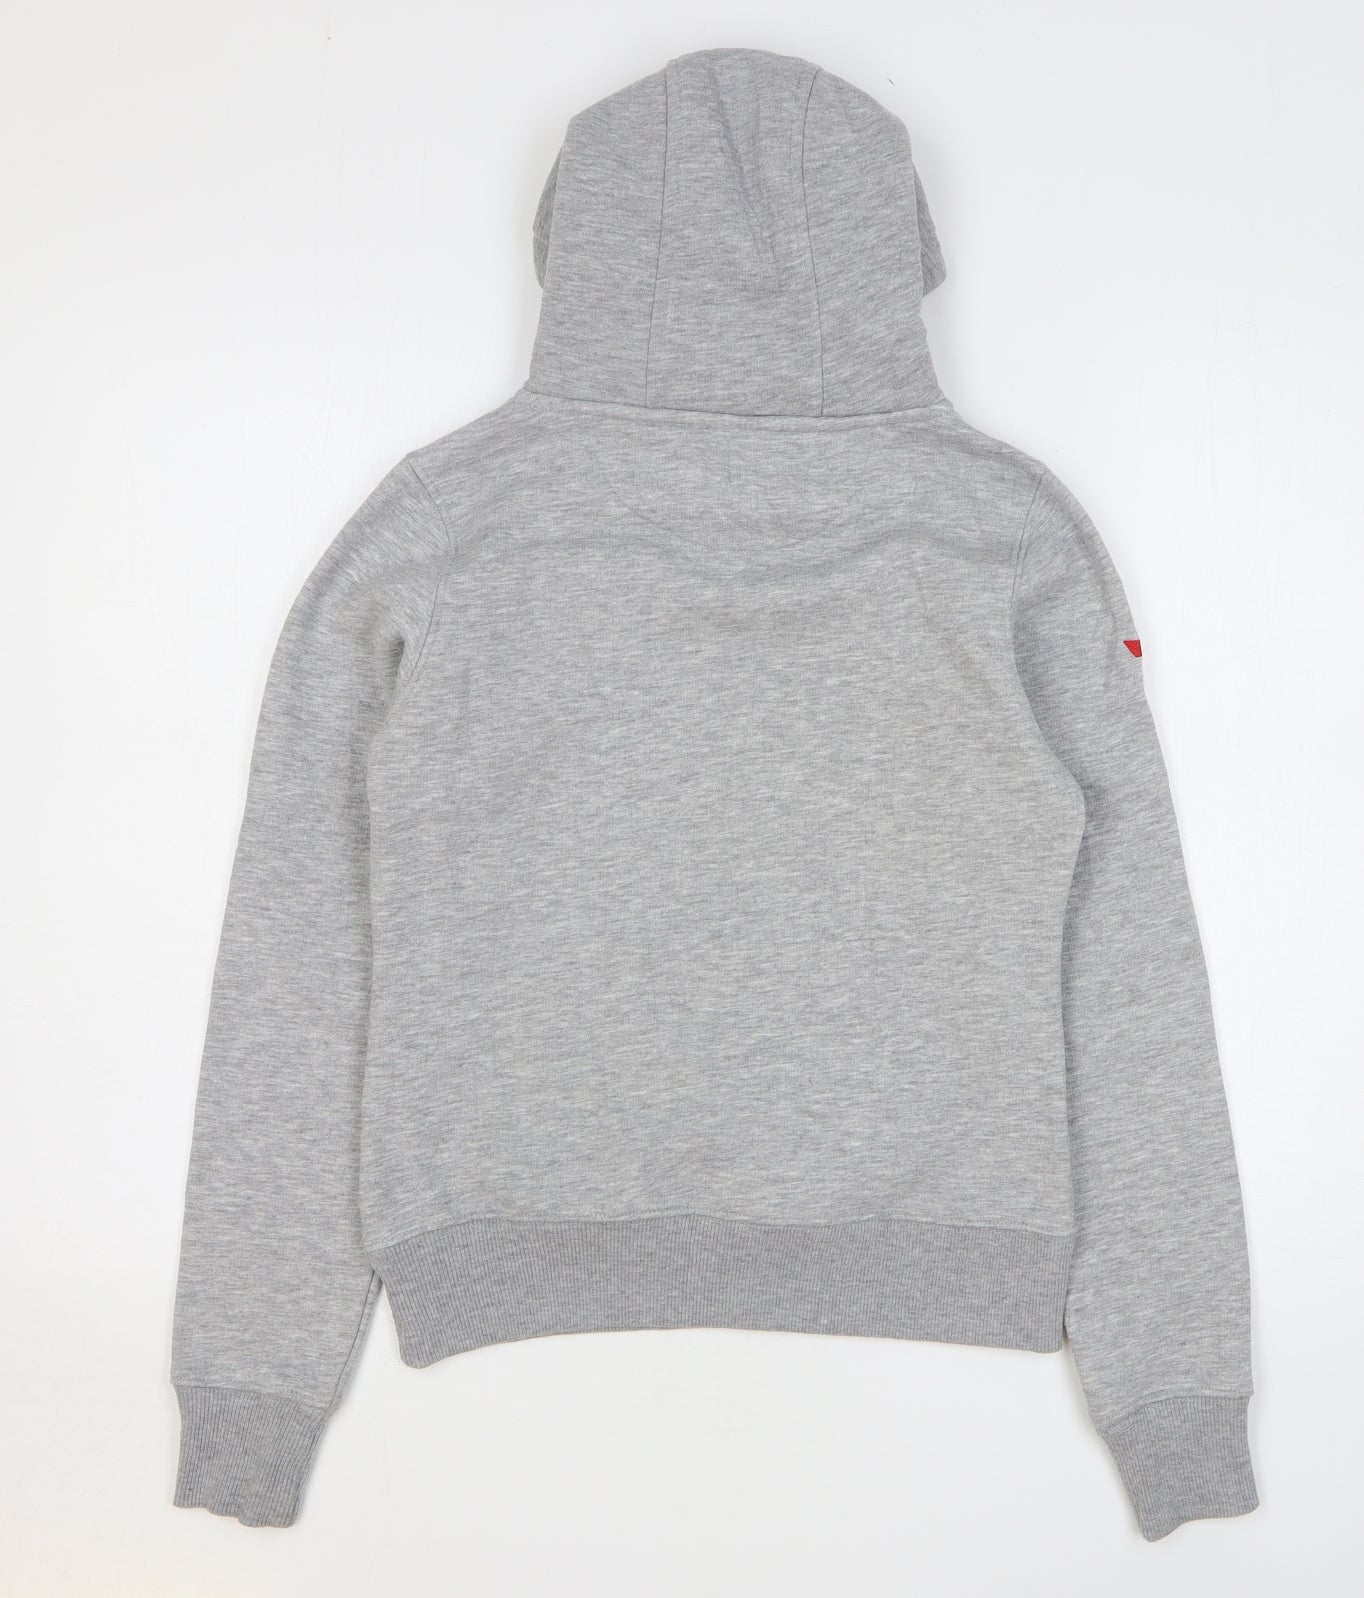 Fanatics Womens Grey Cotton Pullover Hoodie Size 8 Pullover